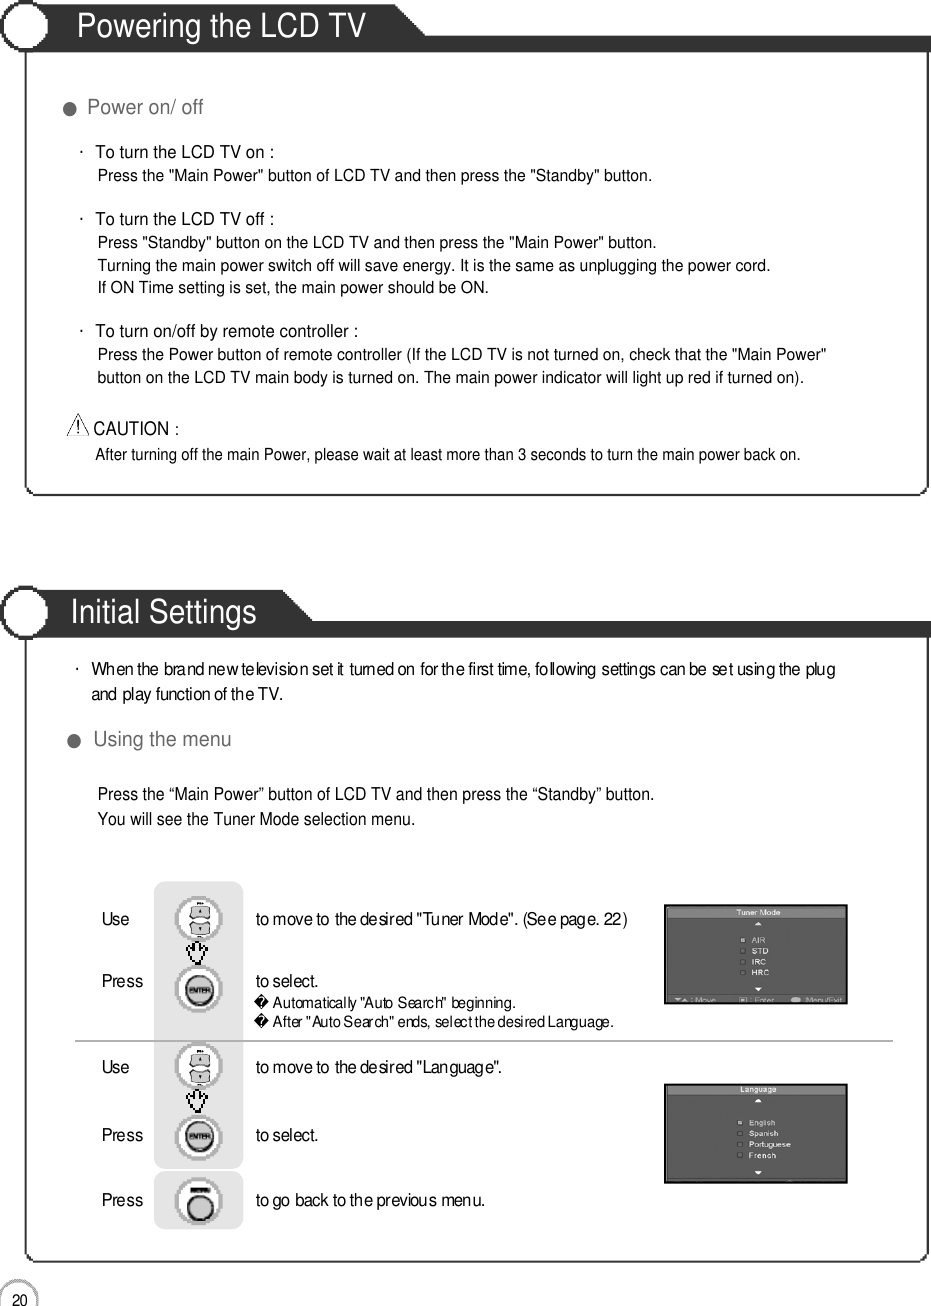 Initial Settings2 0Powering the LCD TV●Power on/ off・To turn the LCD TV on :Press the &quot;Main Power&quot; button of LCD TV and then press the &quot;Standby&quot; button. ・To turn the LCD TV off :Press &quot;Standby&quot; button on the LCD TV and then press the &quot;Main Power&quot; button.Turning the main power switch off will save energy. It is the same as unplugging the power cord.If ON Time setting is set, the main power should be ON. ・To turn on/off by remote controller :Press the Power button of remote controller (If the LCD TV is not turned on, check that the &quot;Main Power&quot; button on the LCD TV main body is turned on. The main power indicator will light up red if turned on).CAUTION :After turning off the main Power, please wait at least more than 3 seconds to turn the main power back on.Basic UsePress the “Main Power” button of LCD TV and then press the “Standby” button.You will see the Tuner Mode selection menu.●Using the menu・When the brand new television set it turned on for the first time, following settings can be set using the plug and play function of the TV.Use                              to move to the desired &quot;Tuner Mode&quot;. (See page. 22)Press                           to select.                 Use                              to move to the desired &quot;Language&quot;.Press                           to select.      Press                           to go back to the previous menu.           Automatically &quot;Auto Search&quot; beginning.After &quot;Auto Search&quot; ends, select the desired Language.